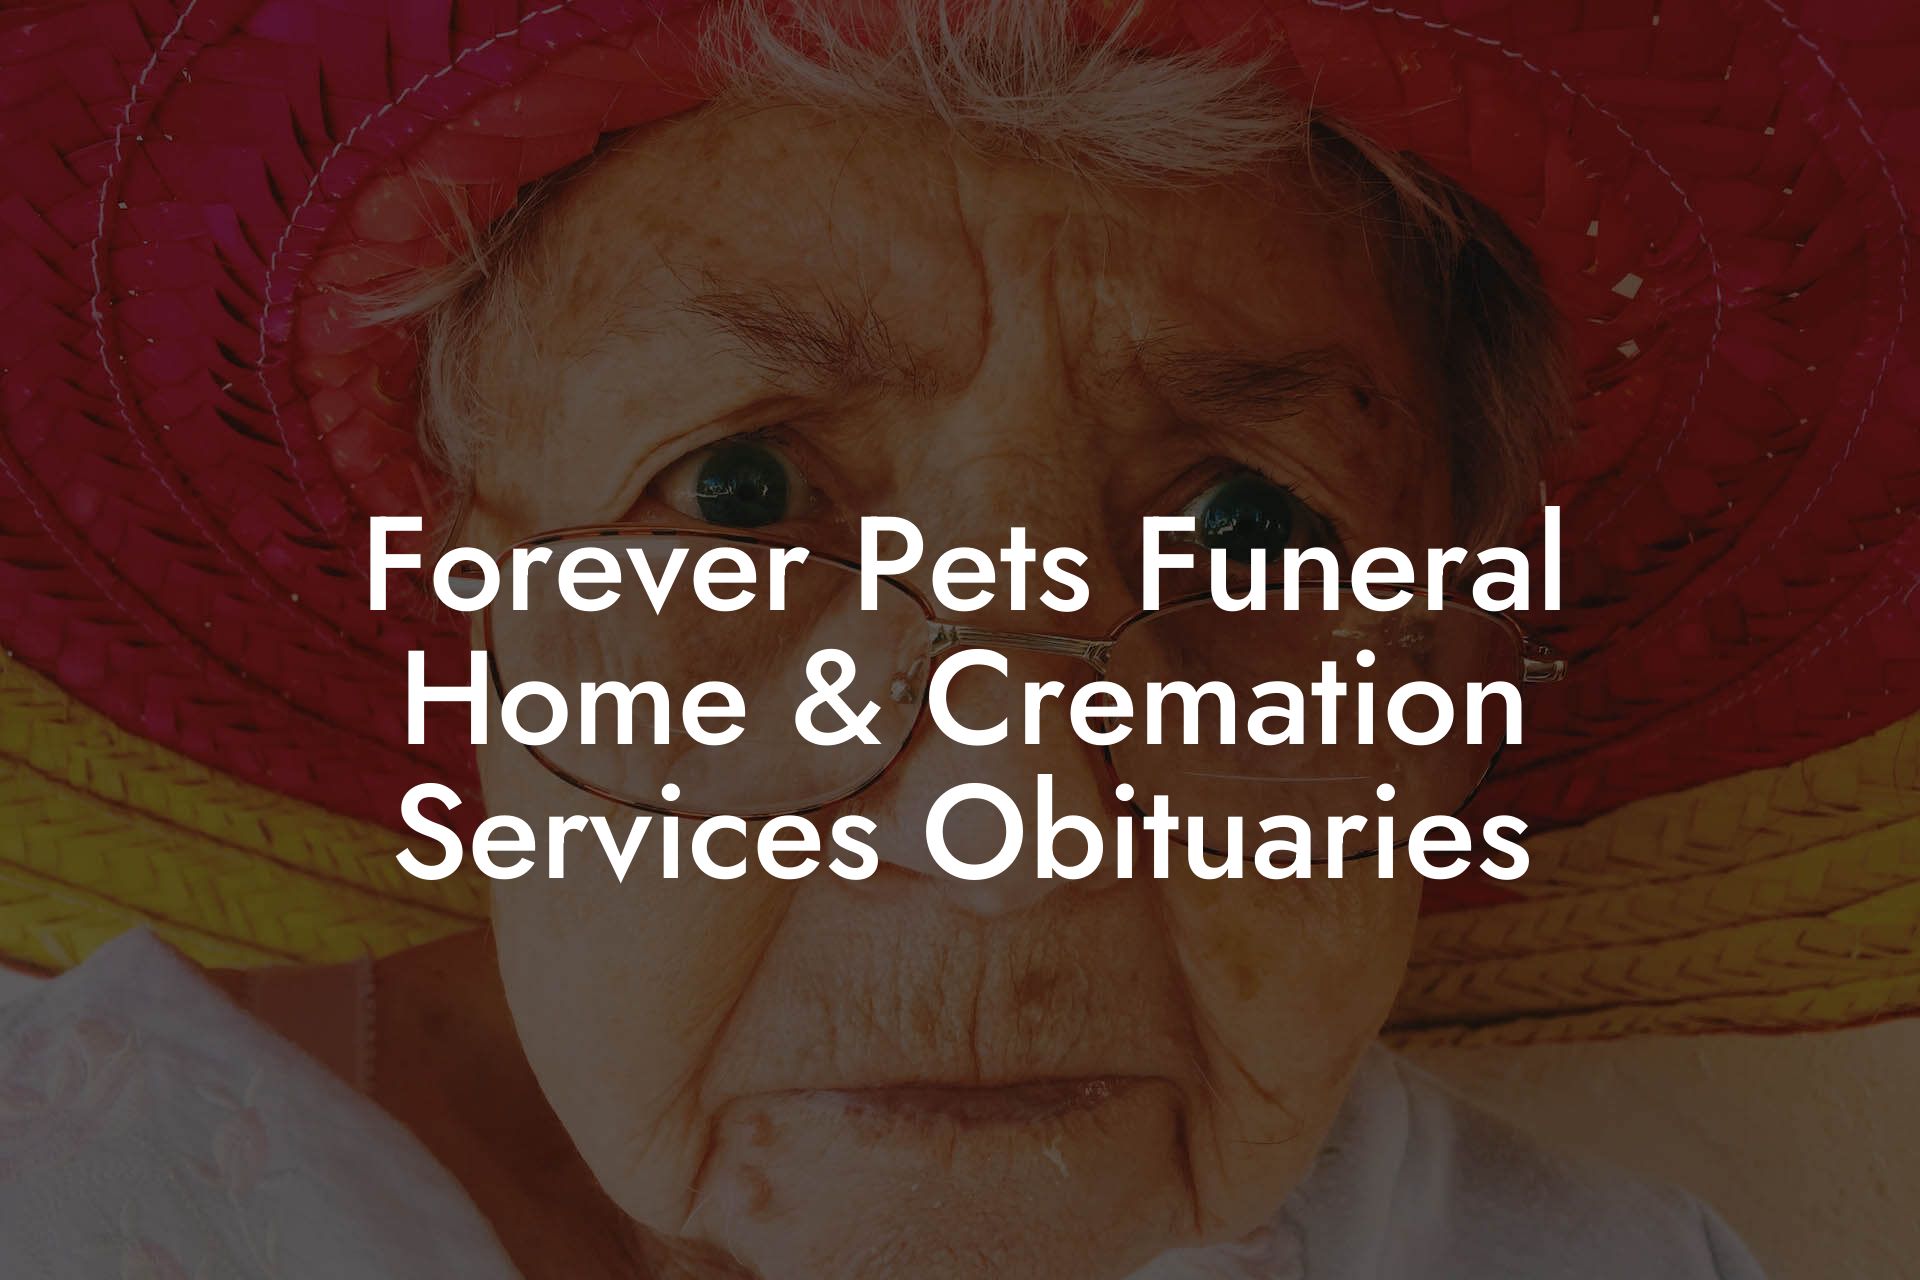 Forever Pets Funeral Home & Cremation Services Obituaries